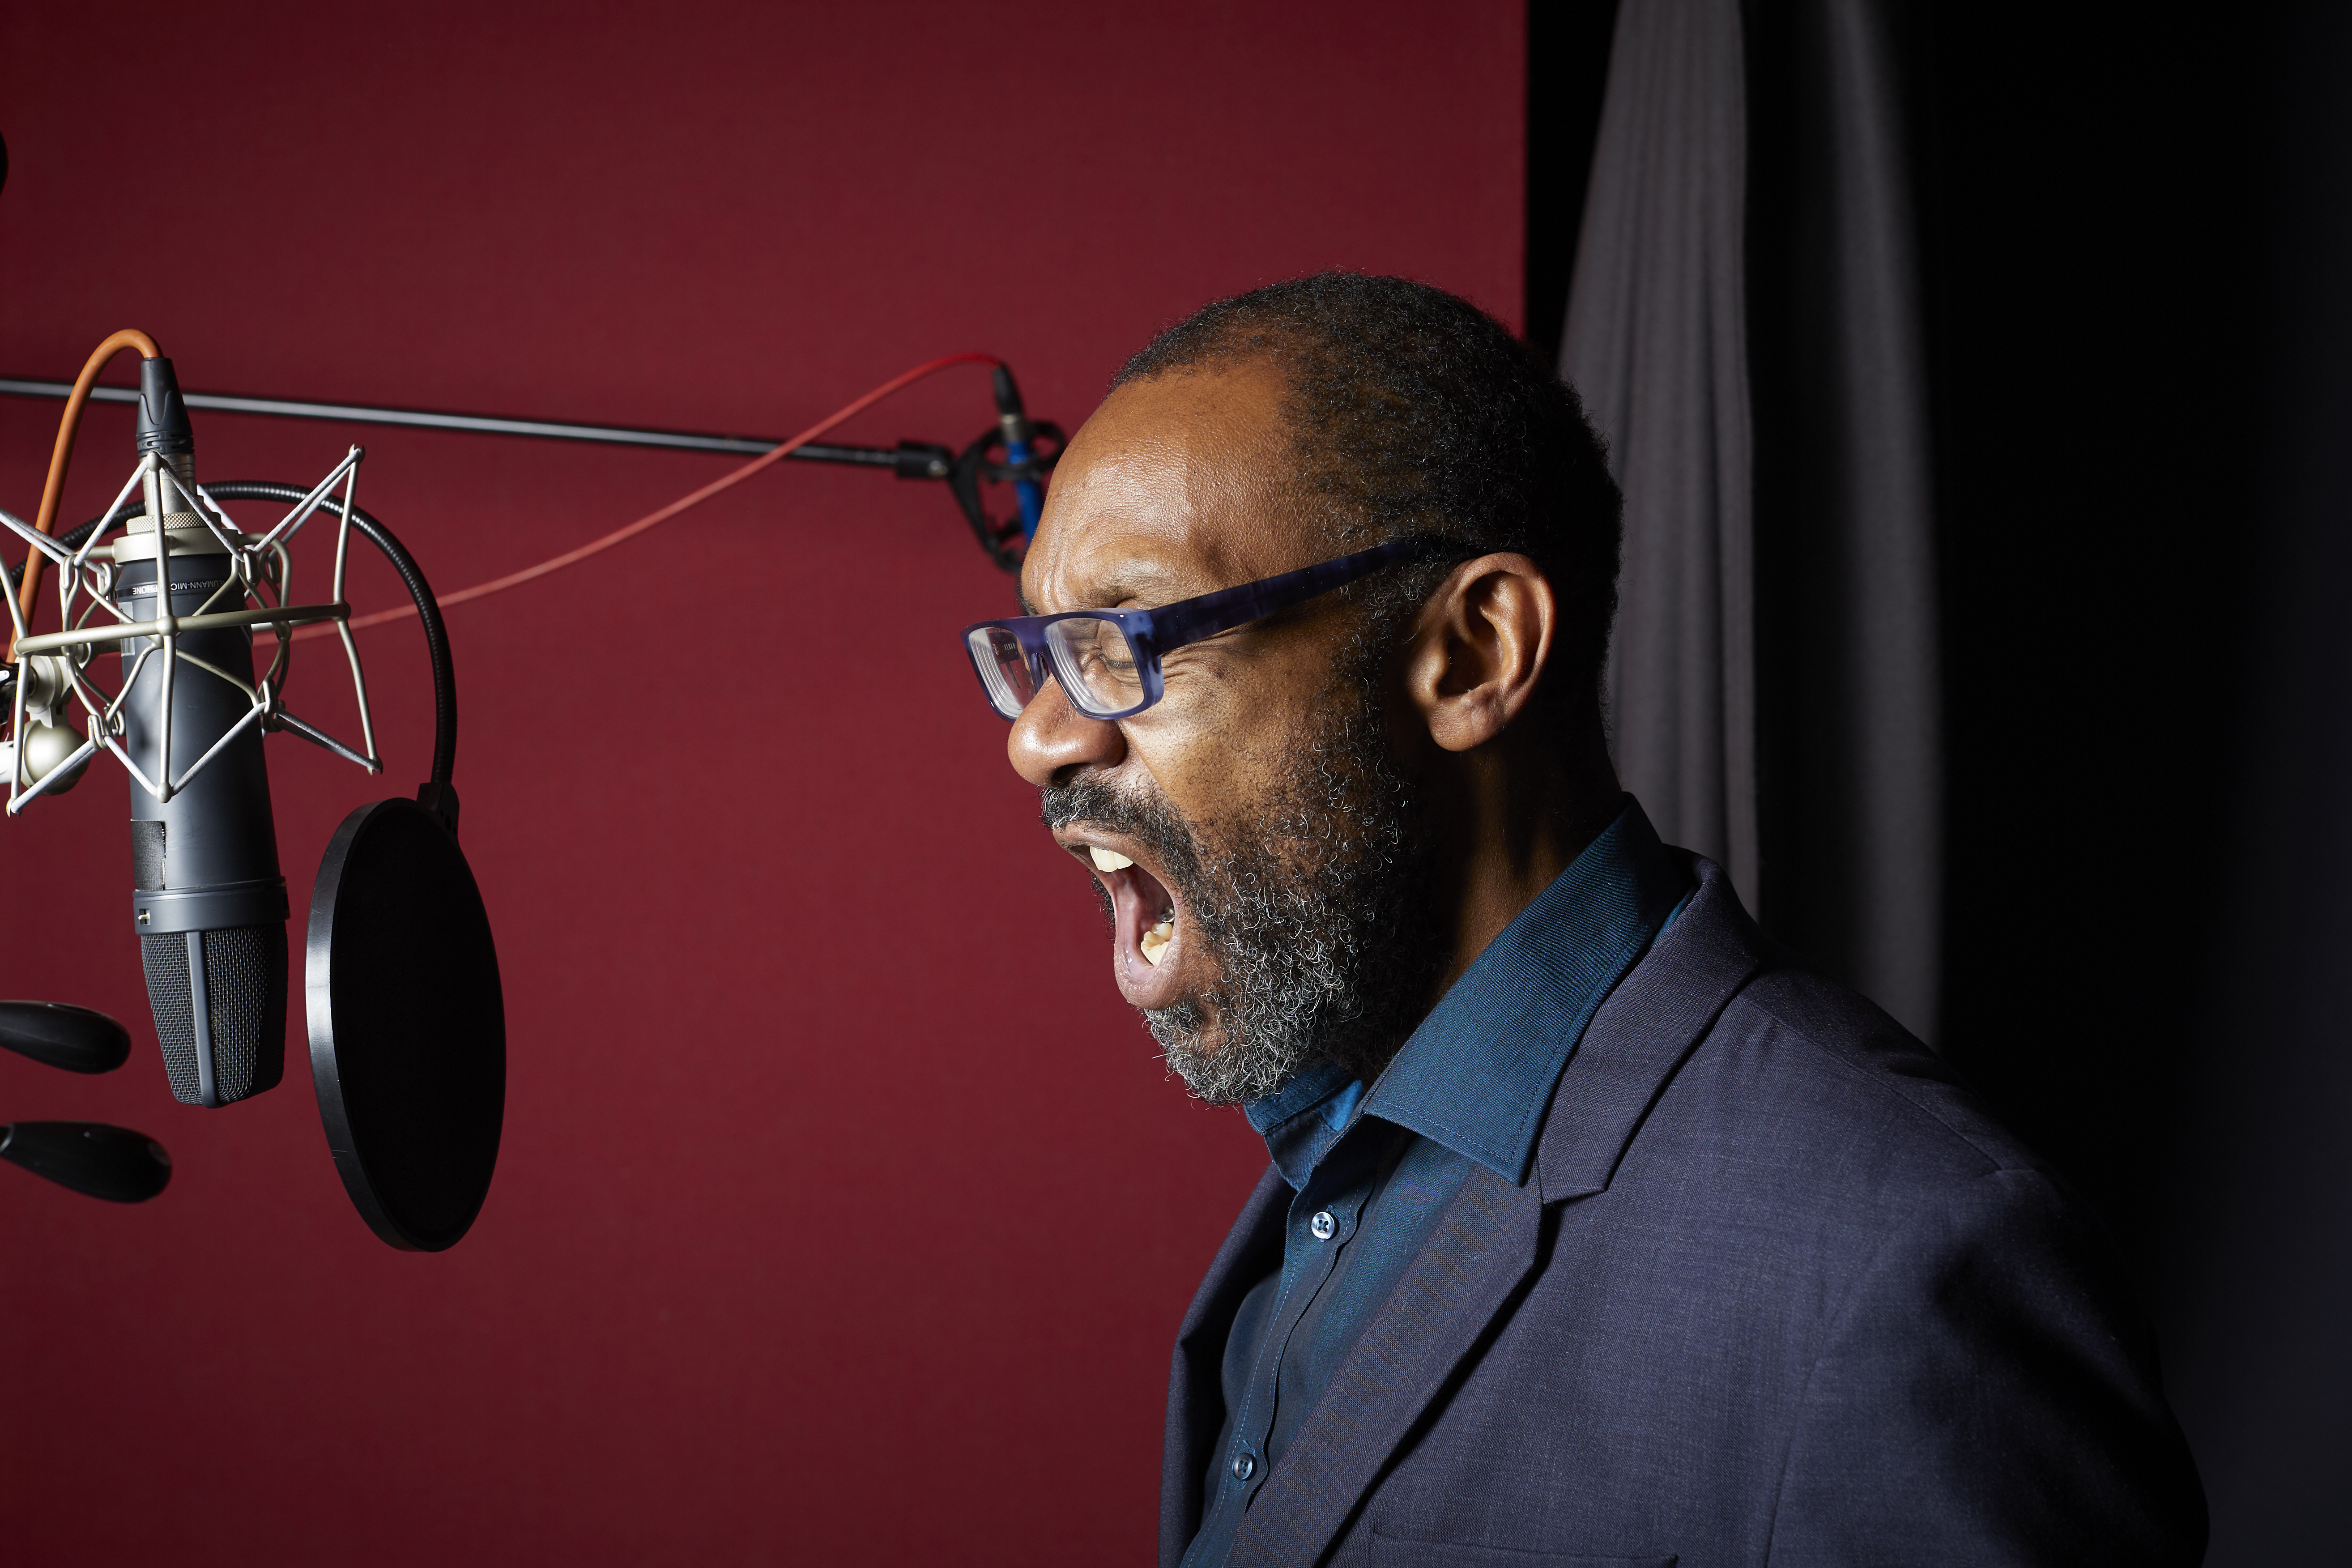 Sir Lenny Henry to narrate 'Zog' this Christmas